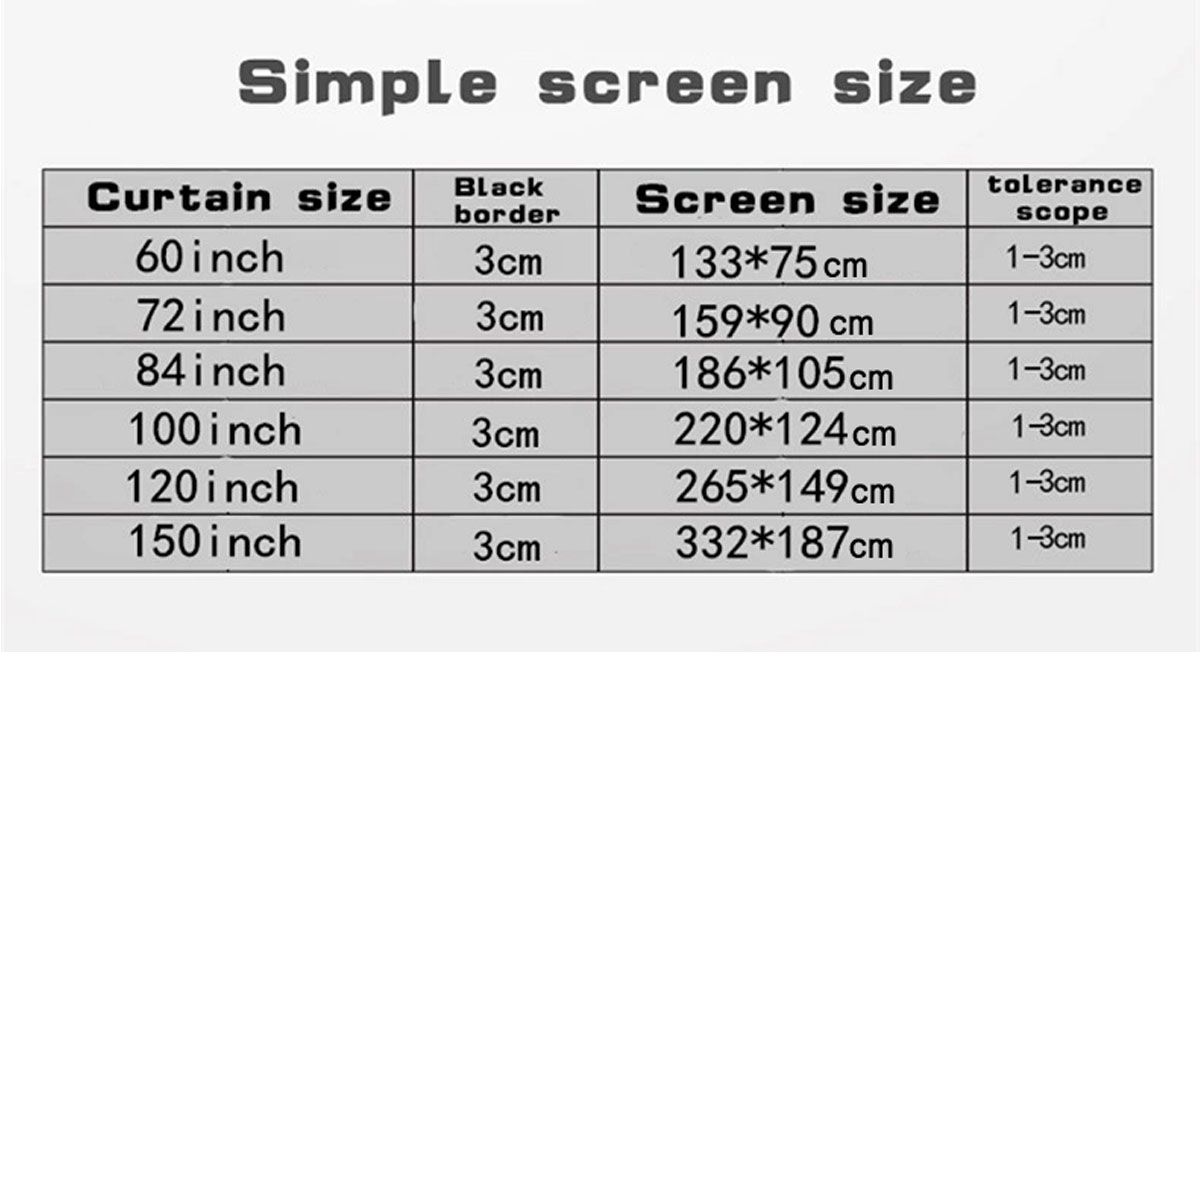 607284100120150-Inch-169-Projector-Screen-Home-Projection-Manual-Hanging-Home-Theater-Movie-1713594